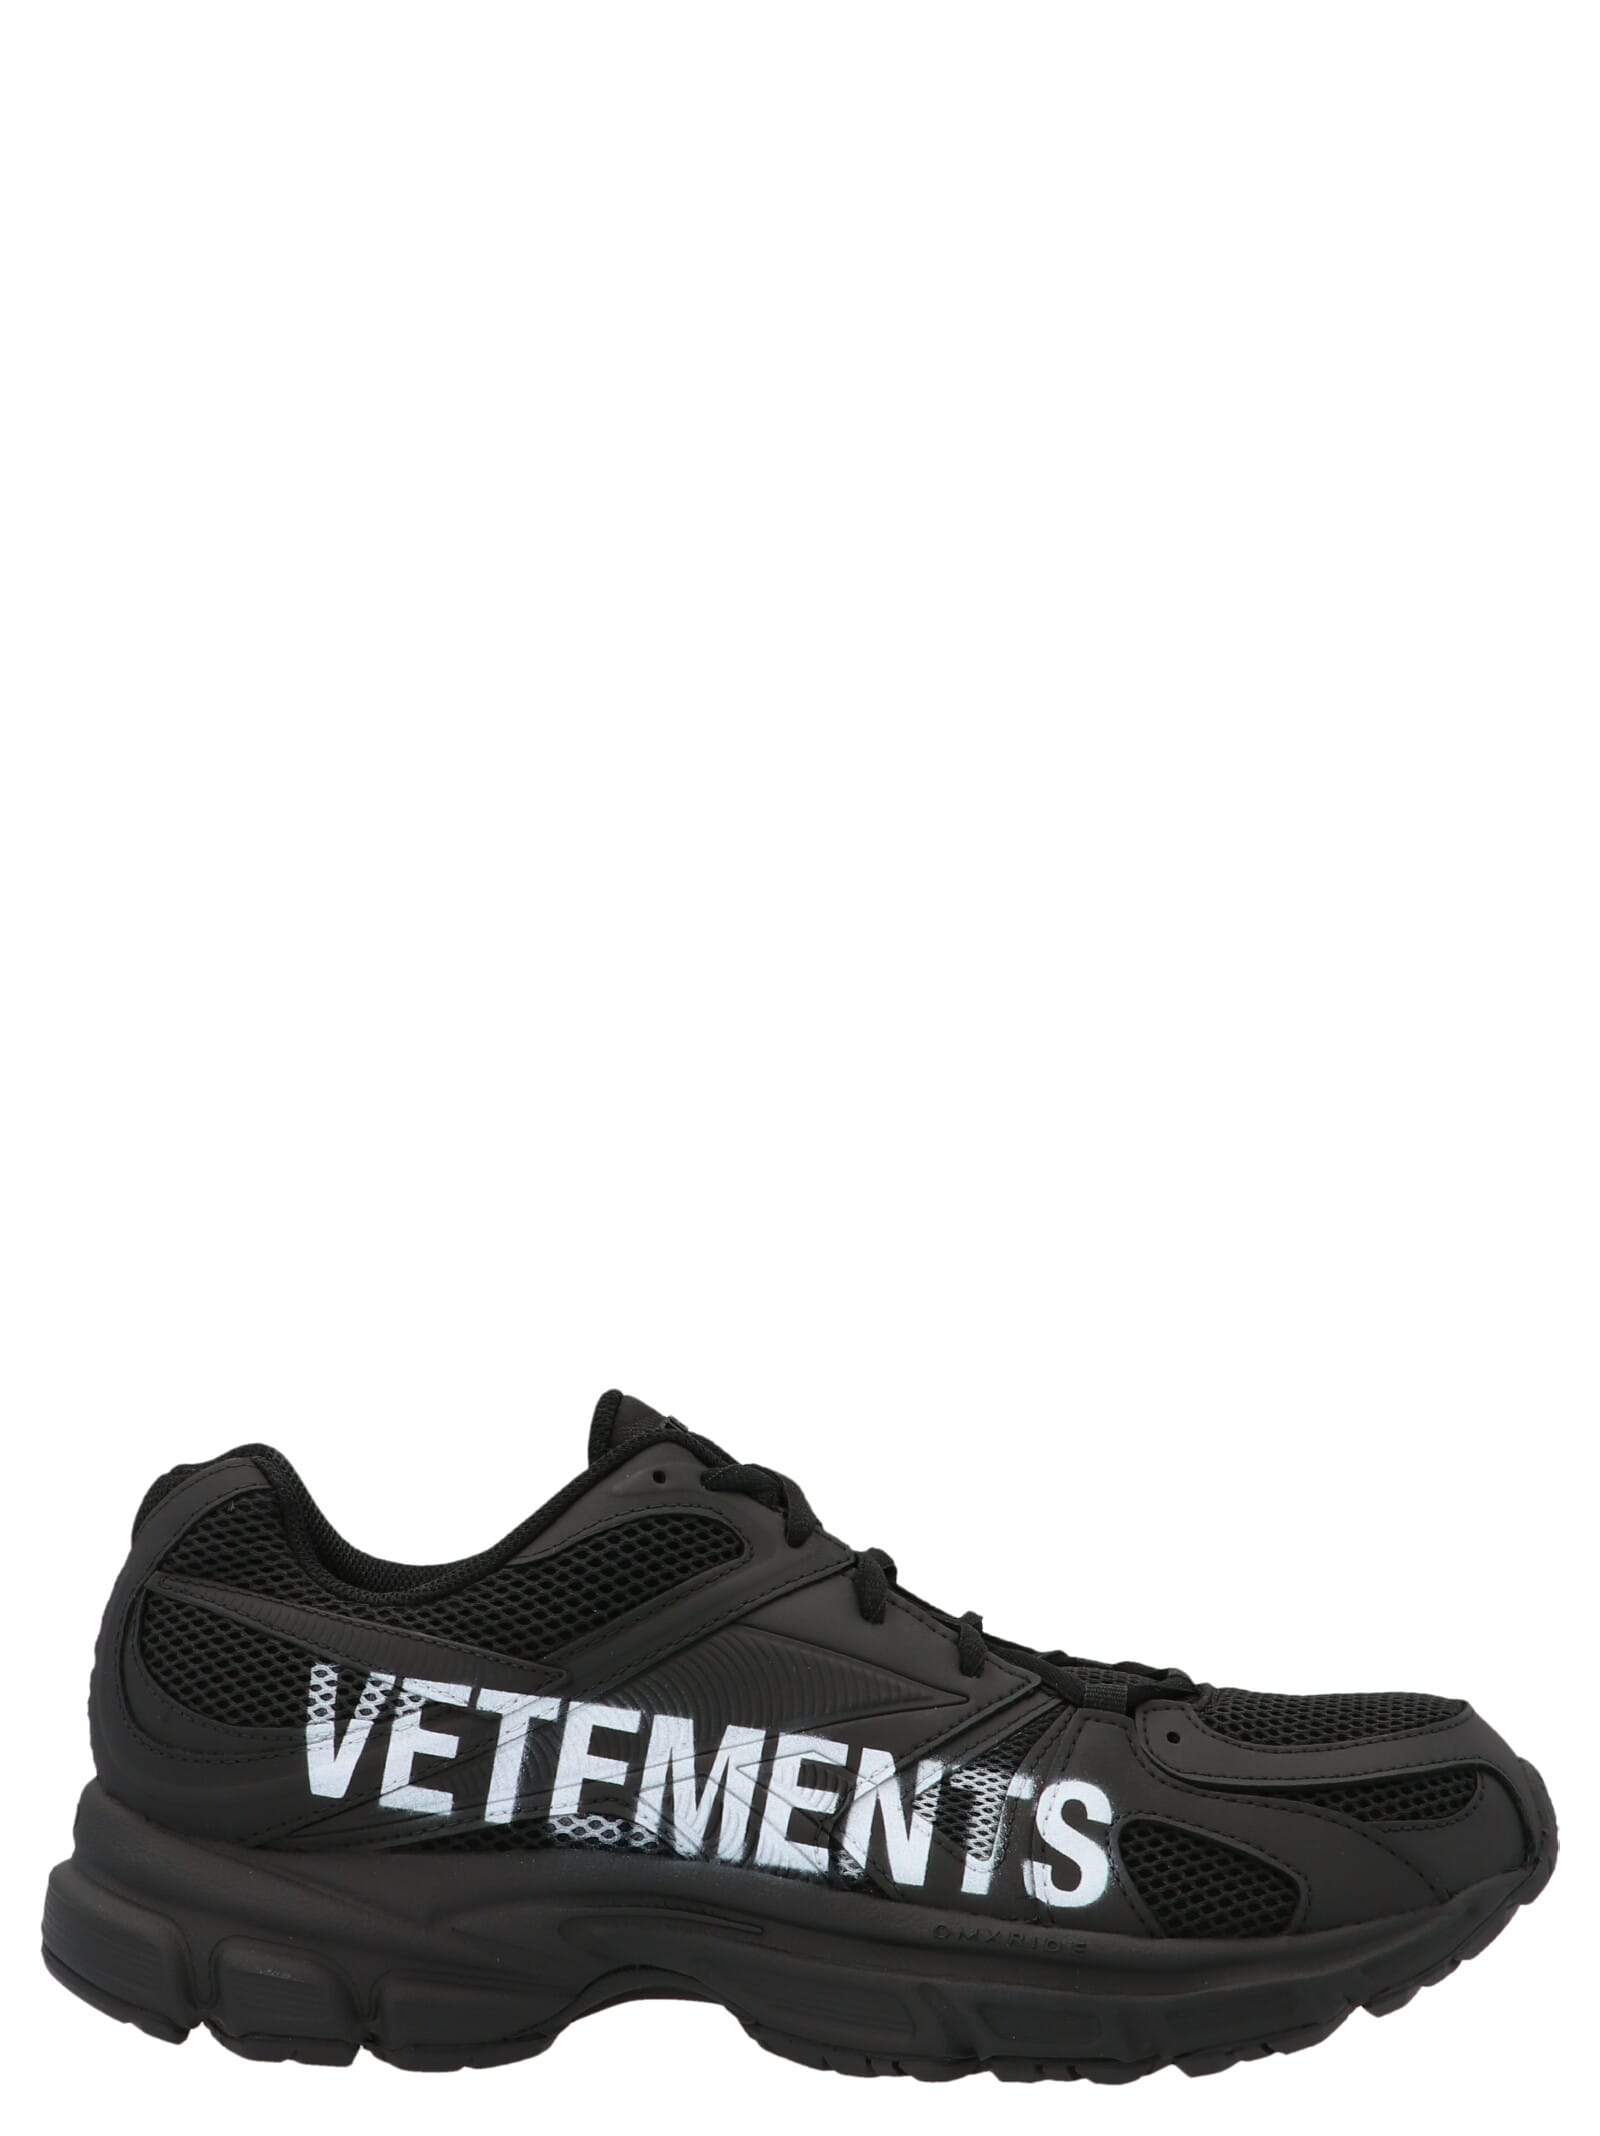 Vetements spike Runners Shoes